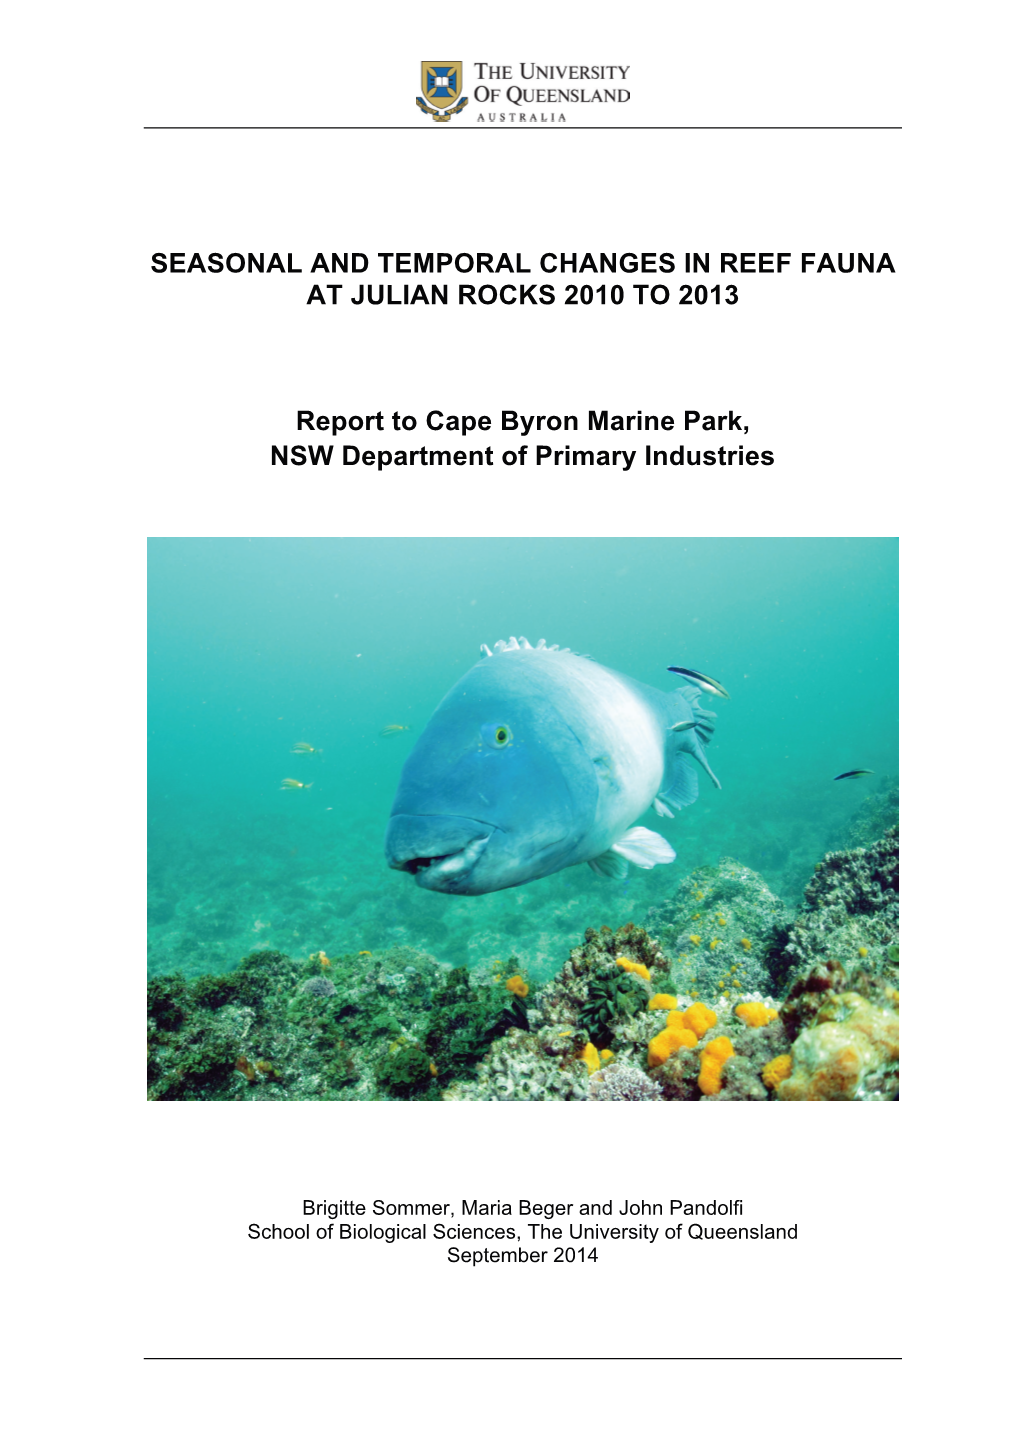 Seasonal and Temporal Changes in Reef Fauna at Julian Rocks 2010 to 2013